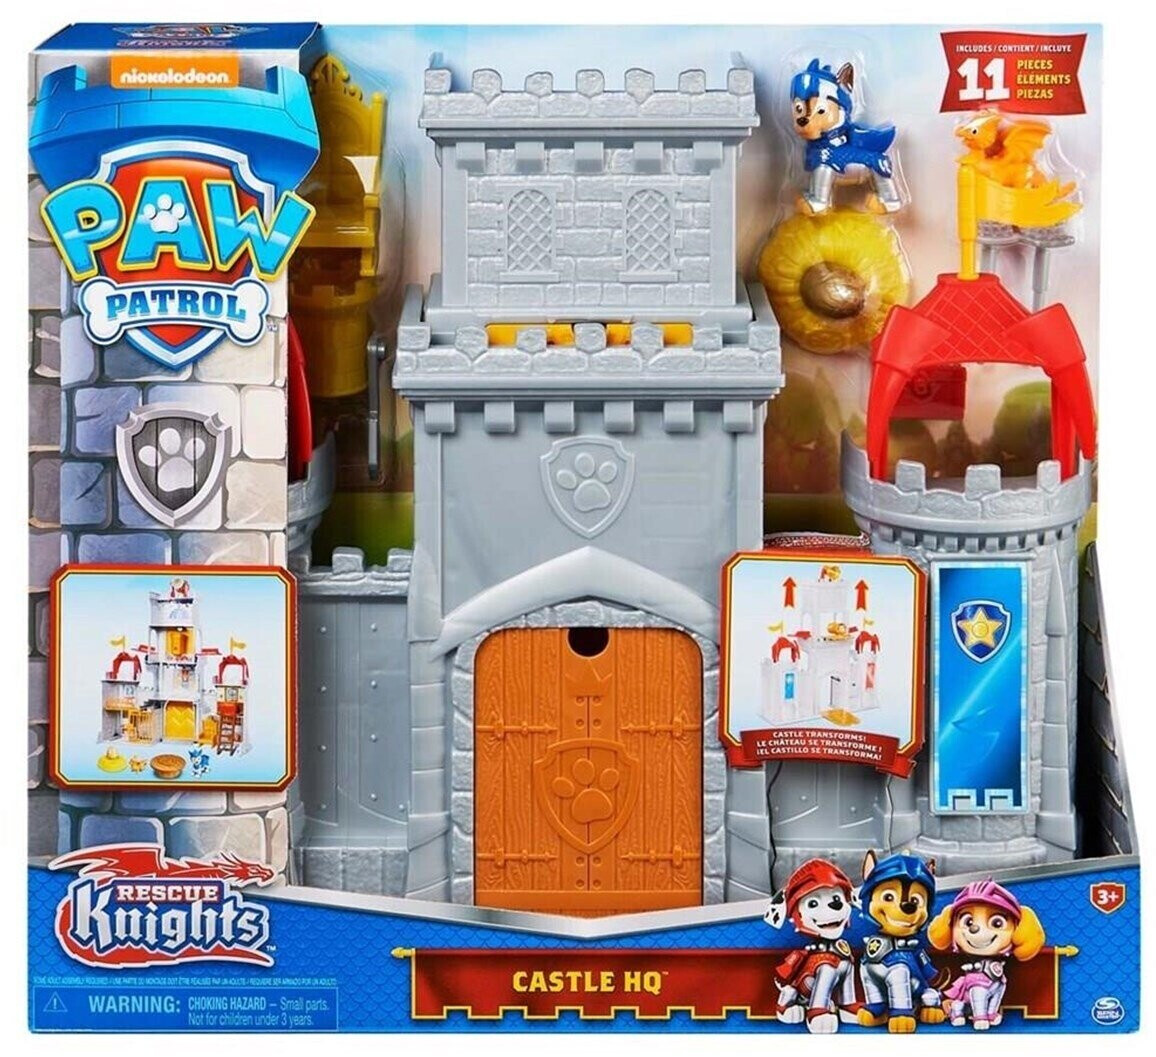 SPIN MASTER Véhicule + Figurine Chase Rescue Knights La Pat' Patrouille pas  cher 